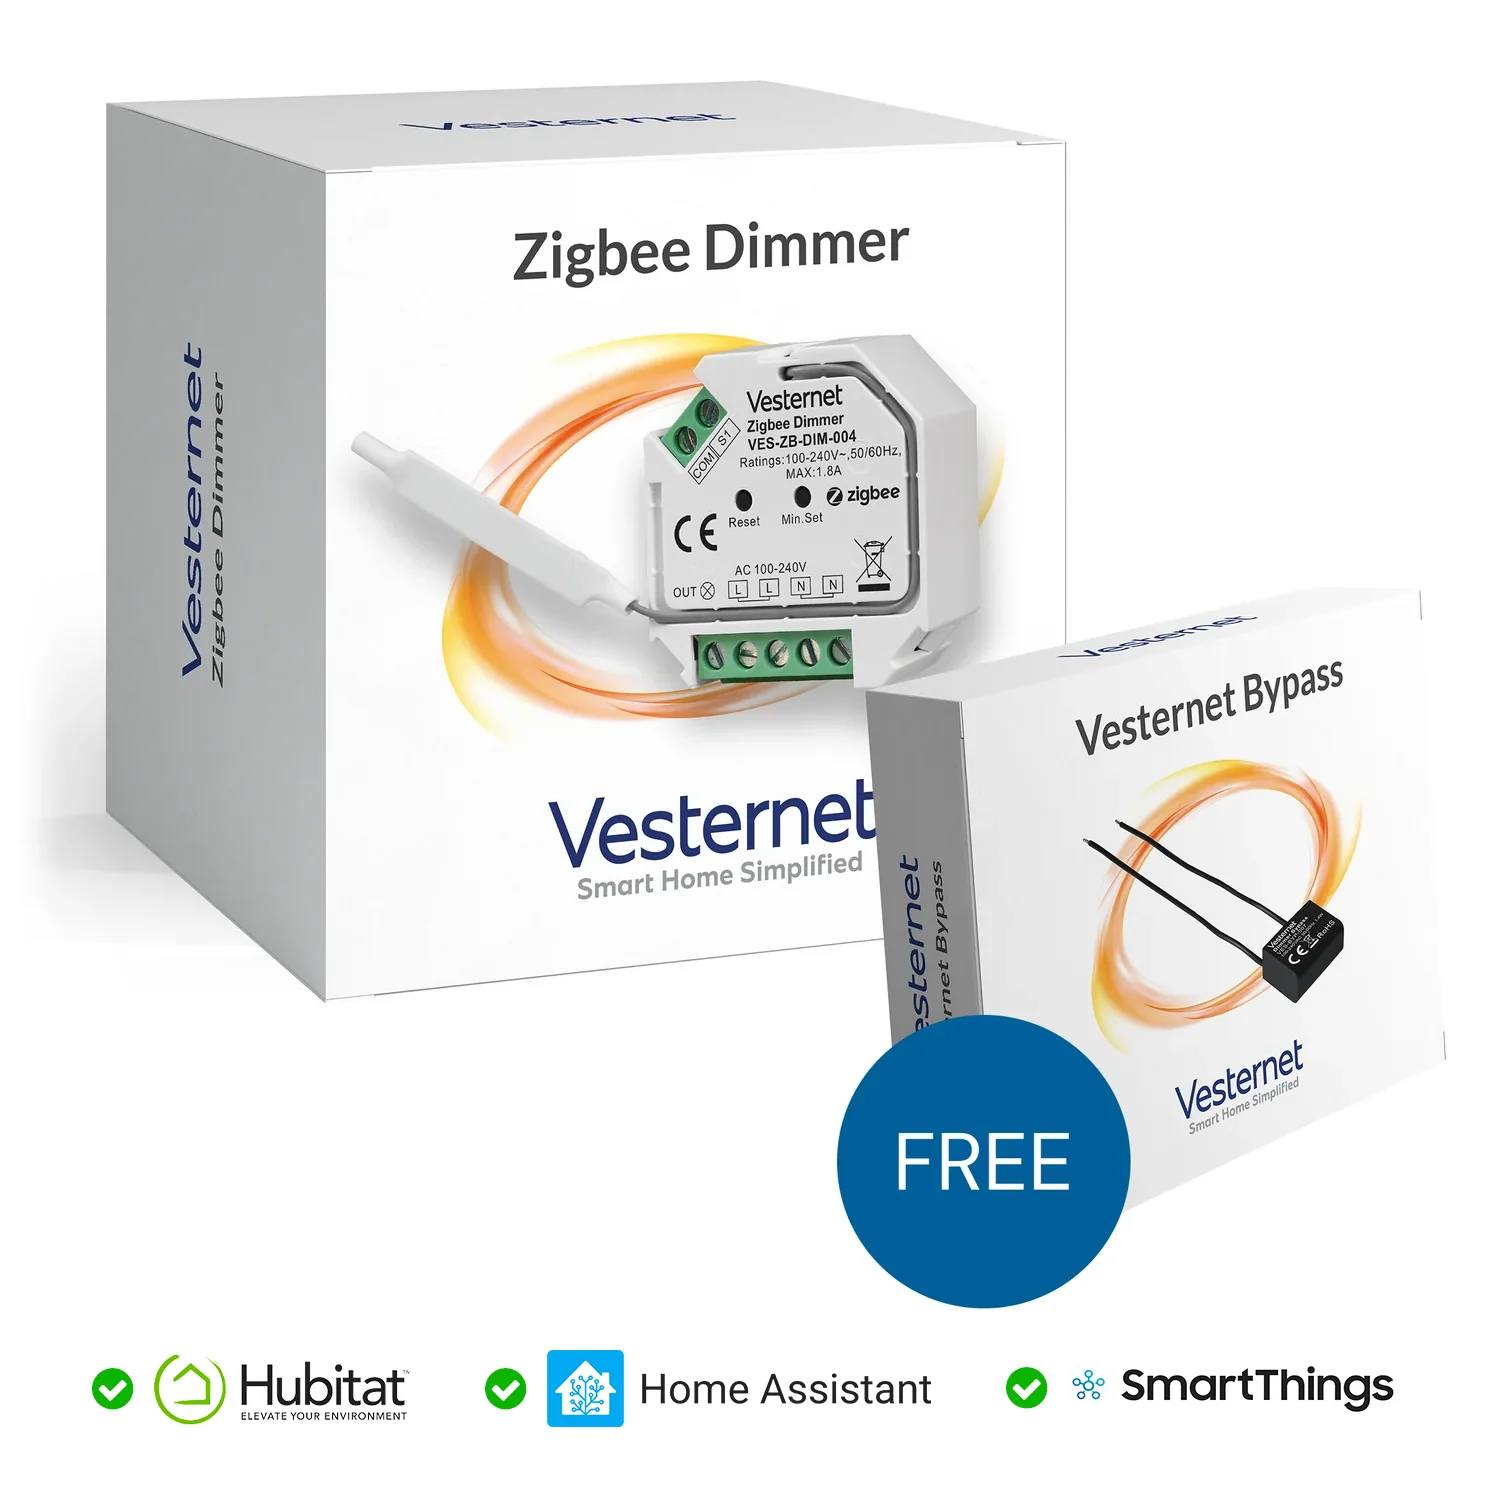 Does the Zigbee dimmer support all load types?